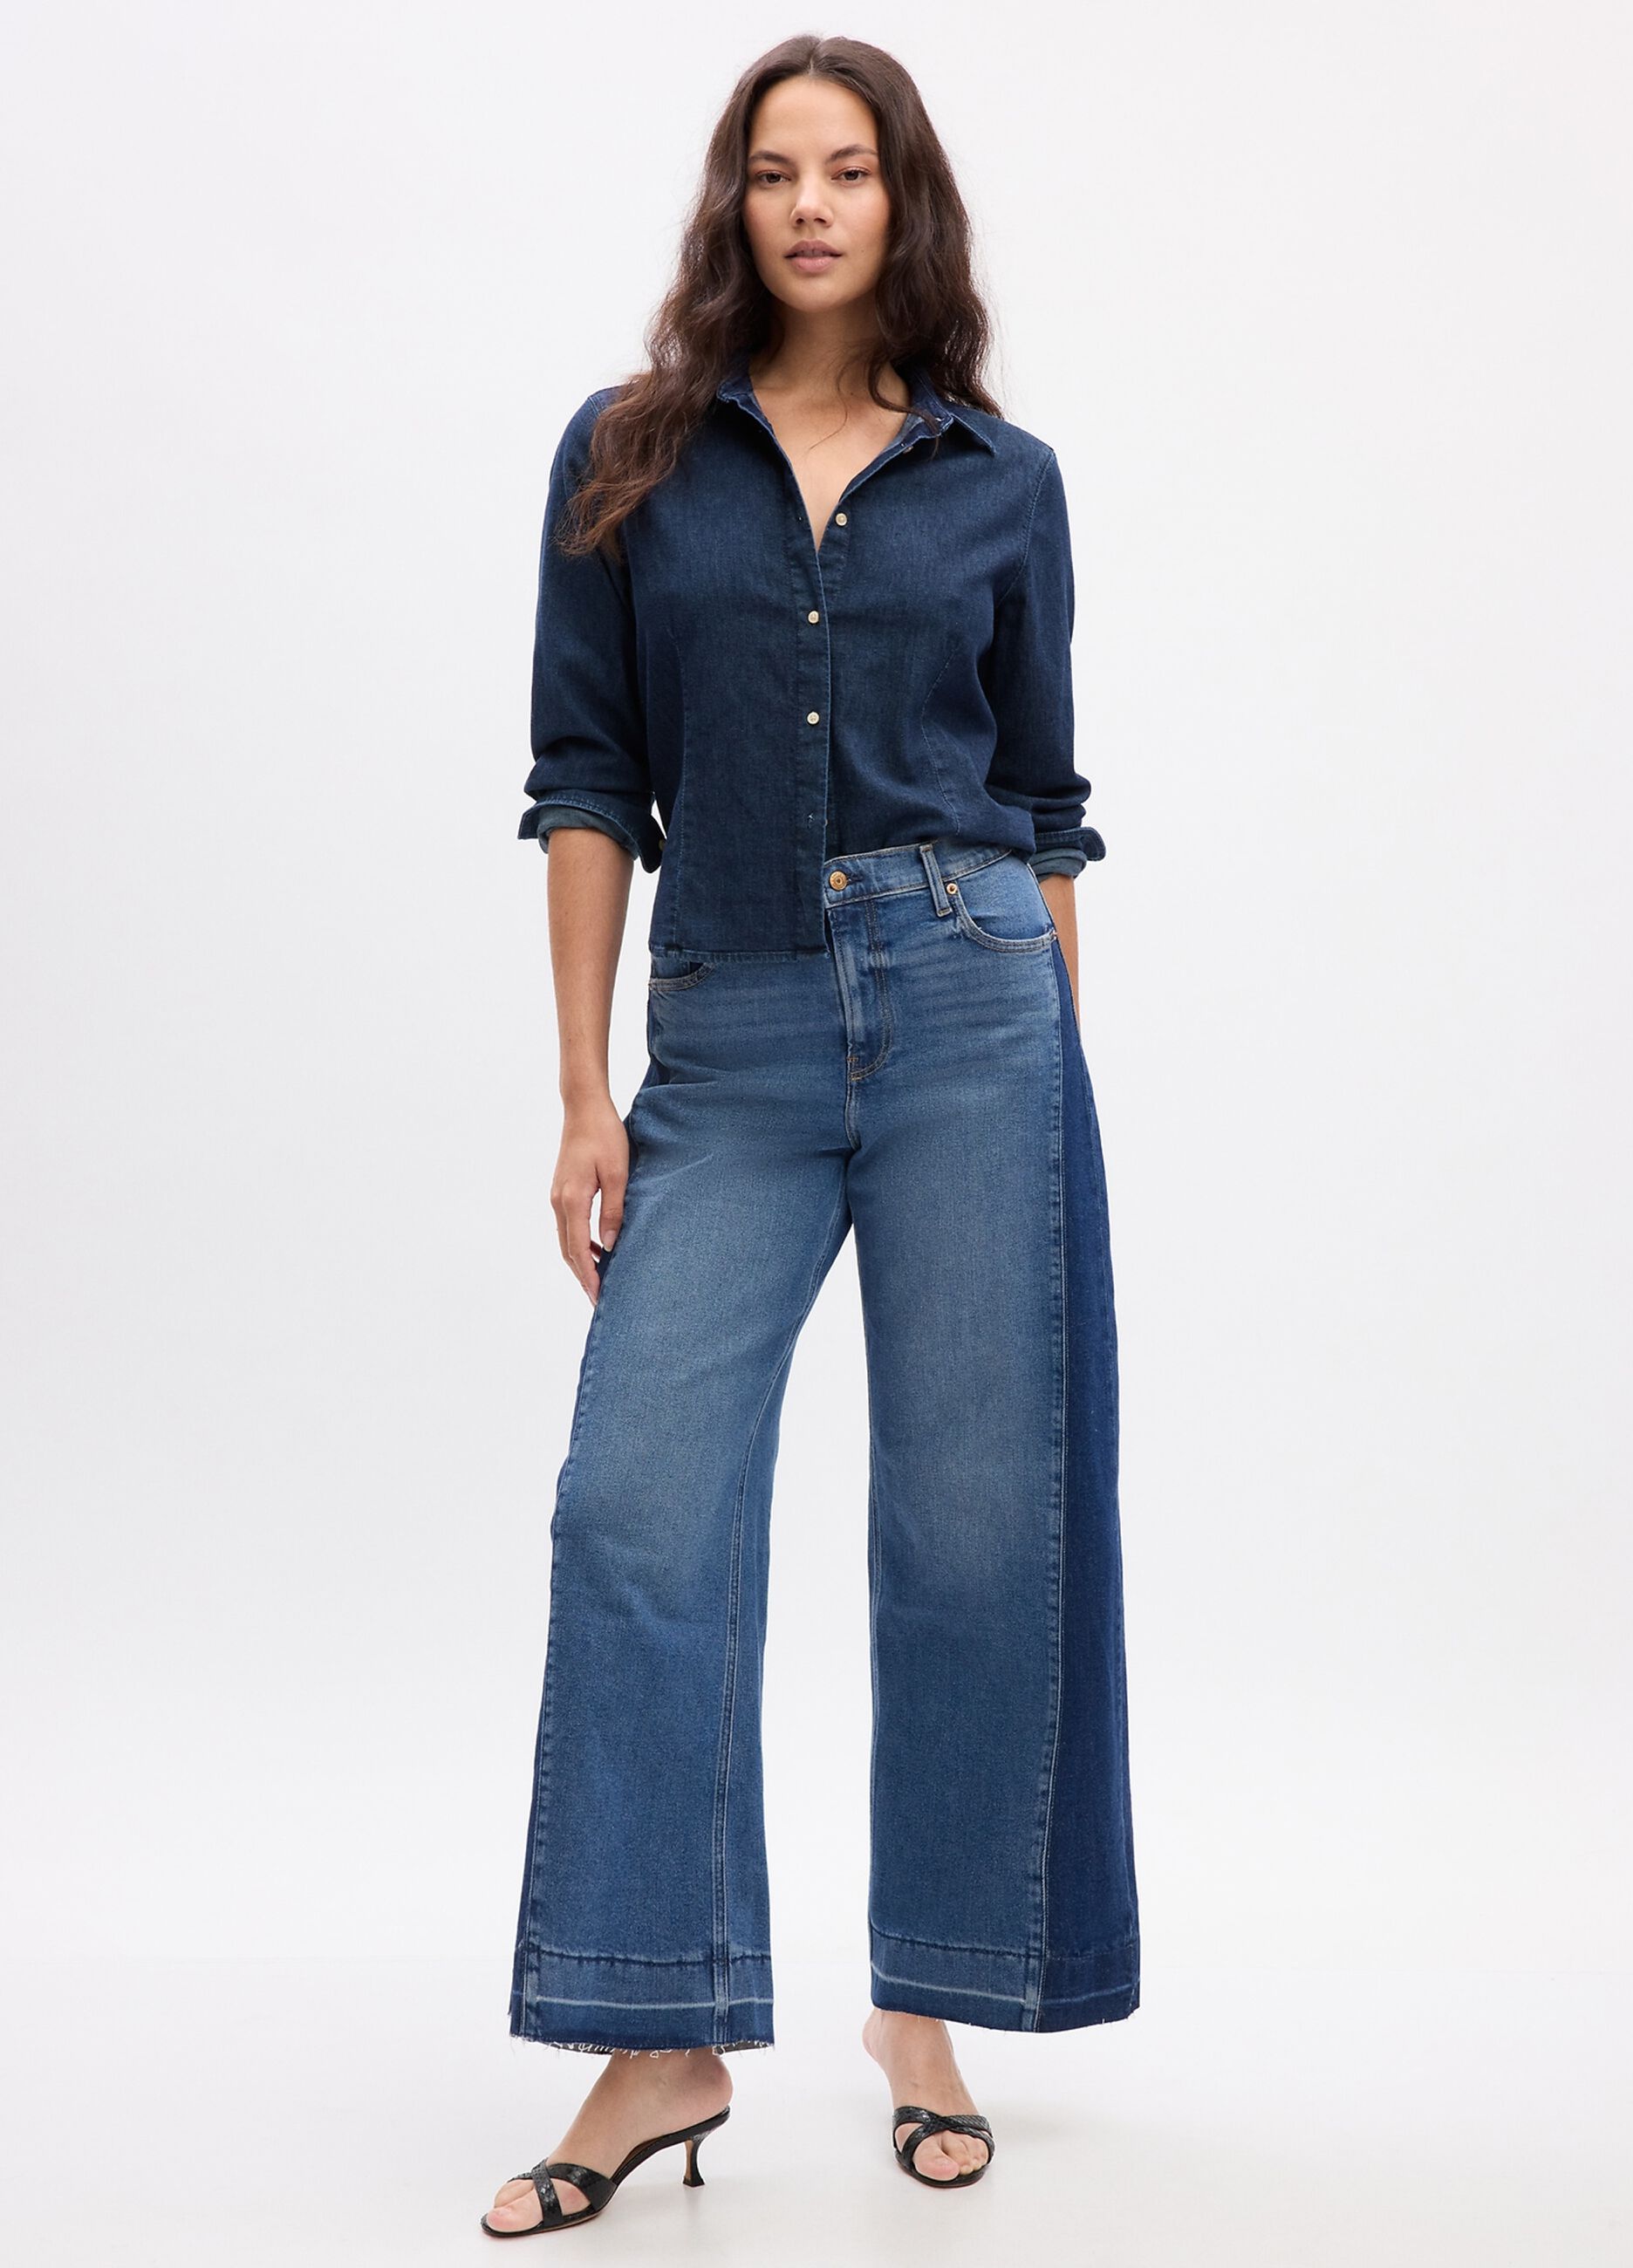 Two-tone, wide-leg jeans with high waist